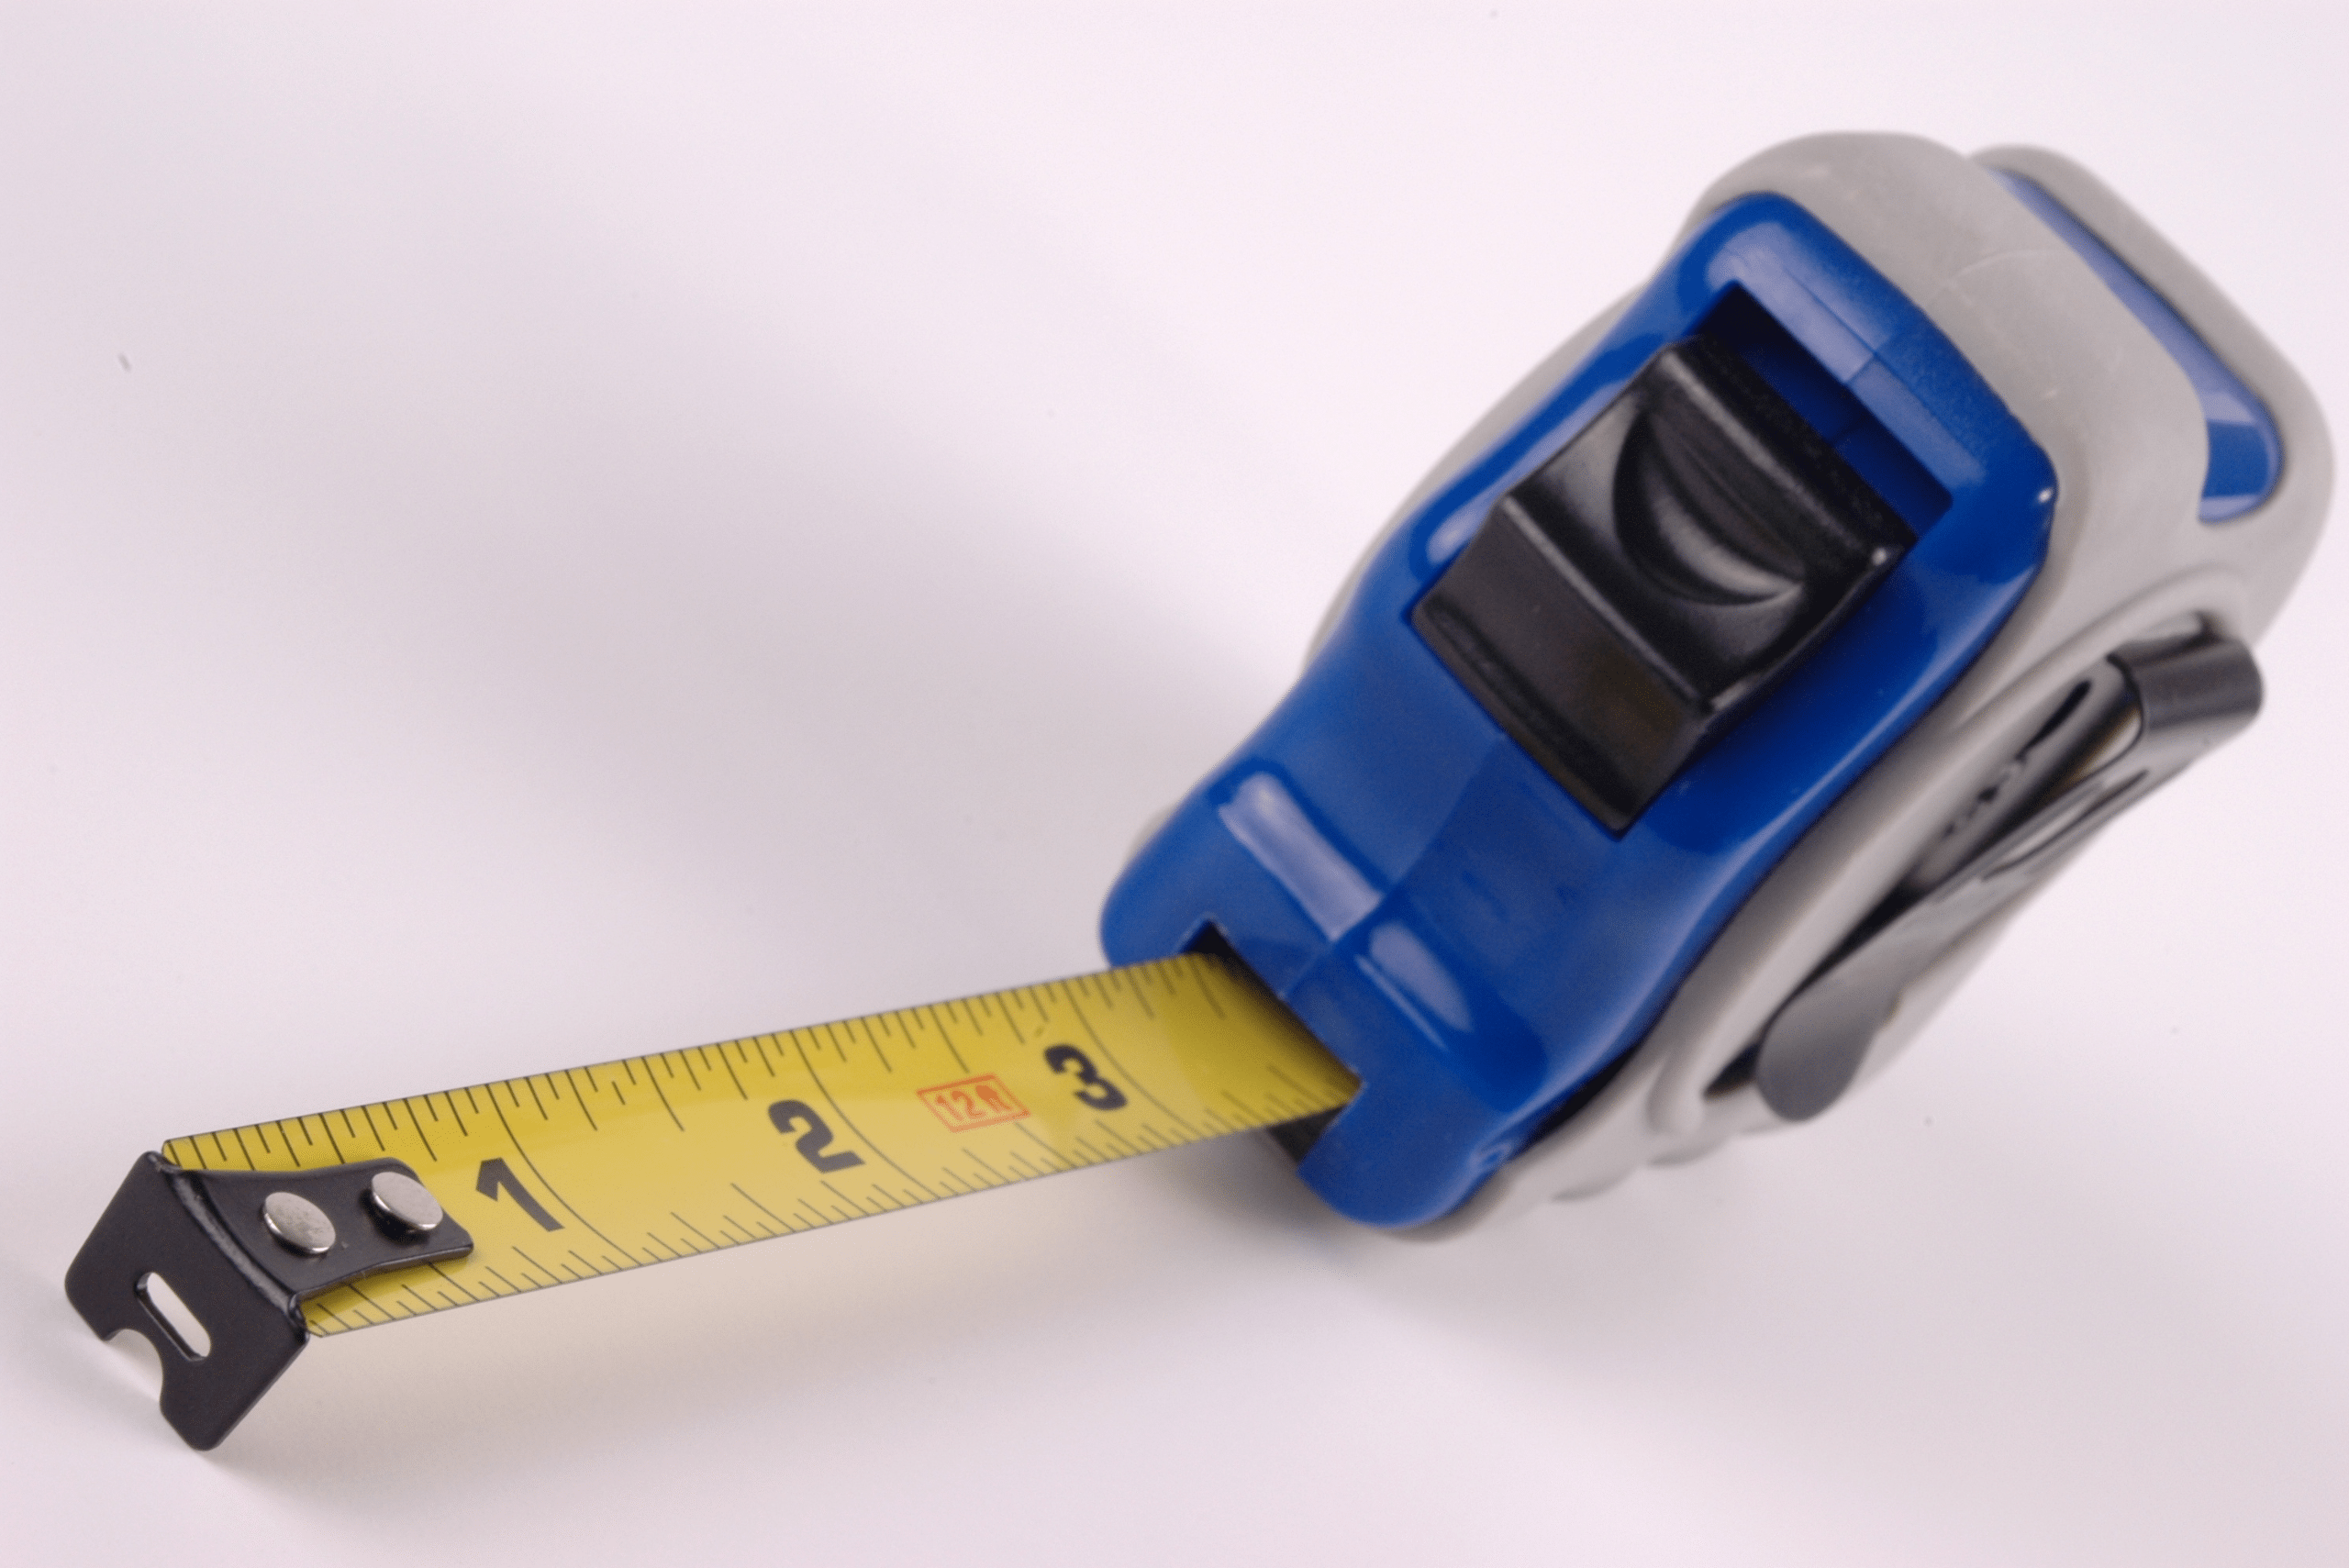 A blue measuring tape with measuring marks.